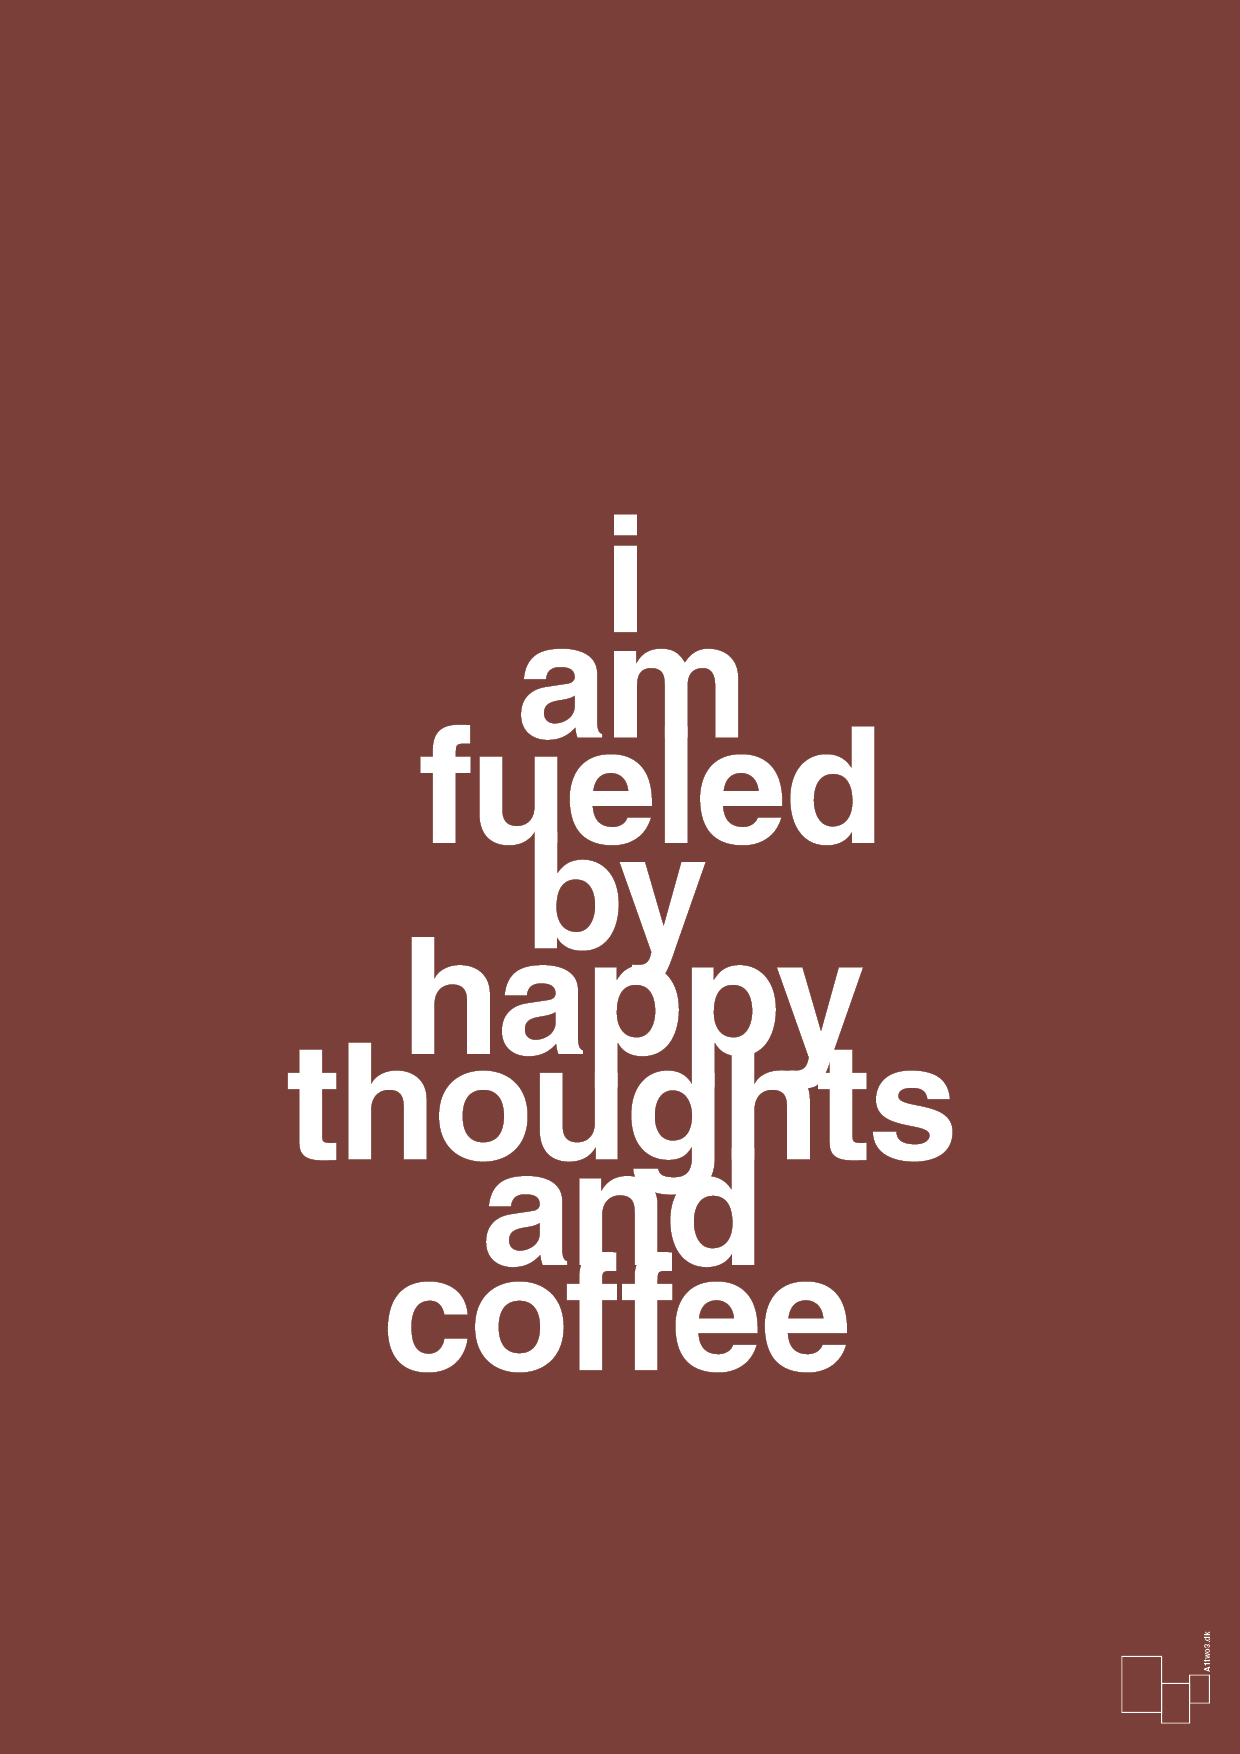 i am fueled by happy thoughts and coffee - Plakat med Mad & Drikke i Red Pepper